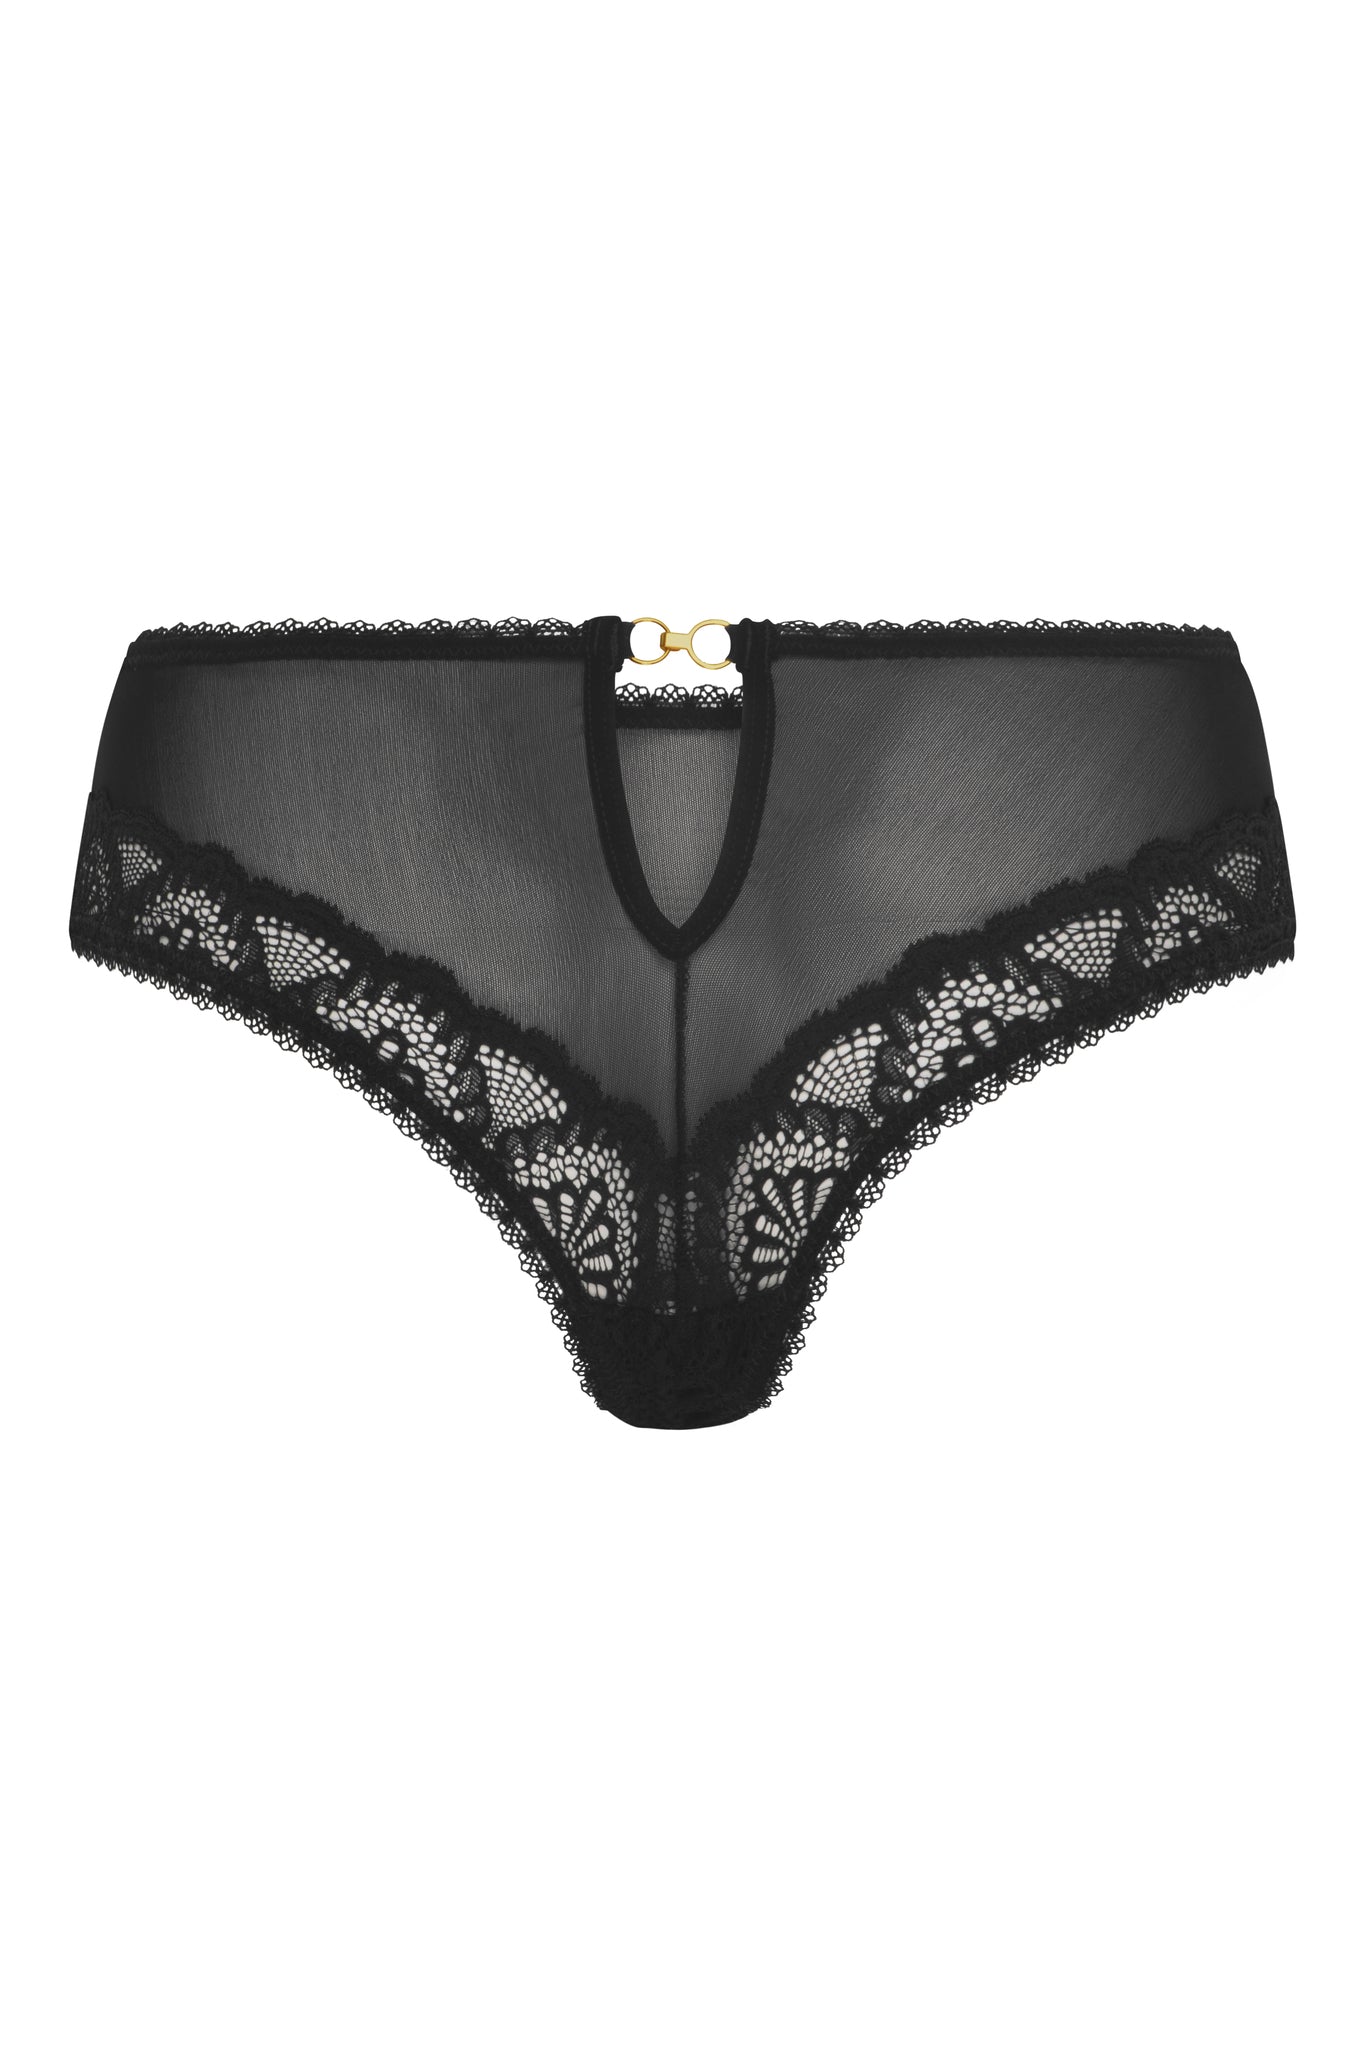 Aberdevine® Luxurious and responsible- Lingerie that liberates